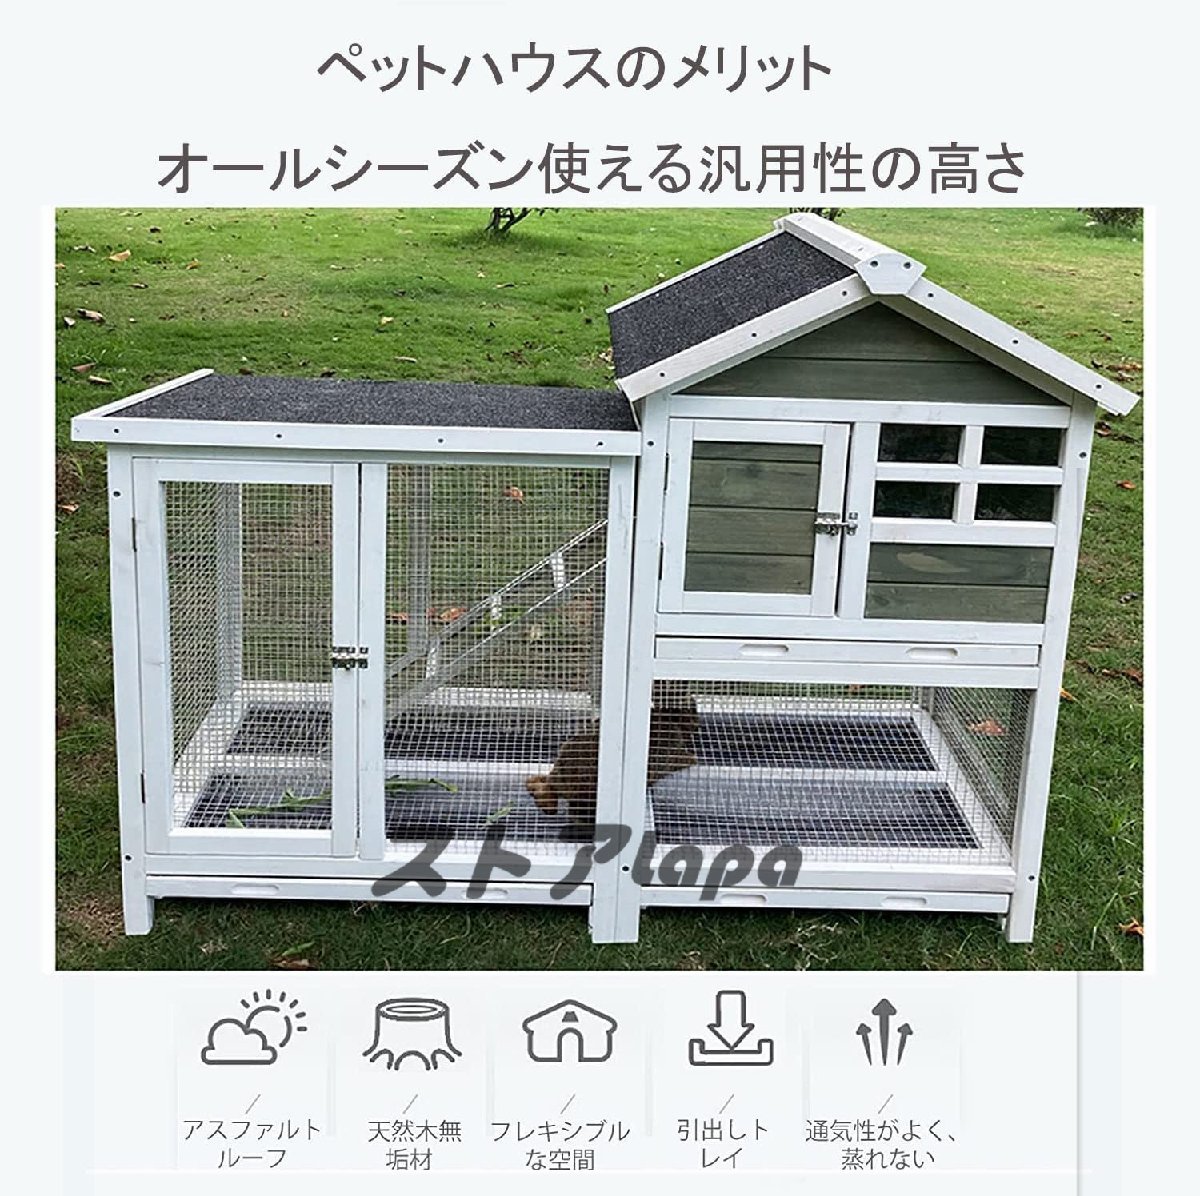  bargain sale rabbit cage ... small shop rabbit cage wooden small animals apartment men to Flat . outdoors rabbit cage outdoors two layer wooden chi gold small shop Y053